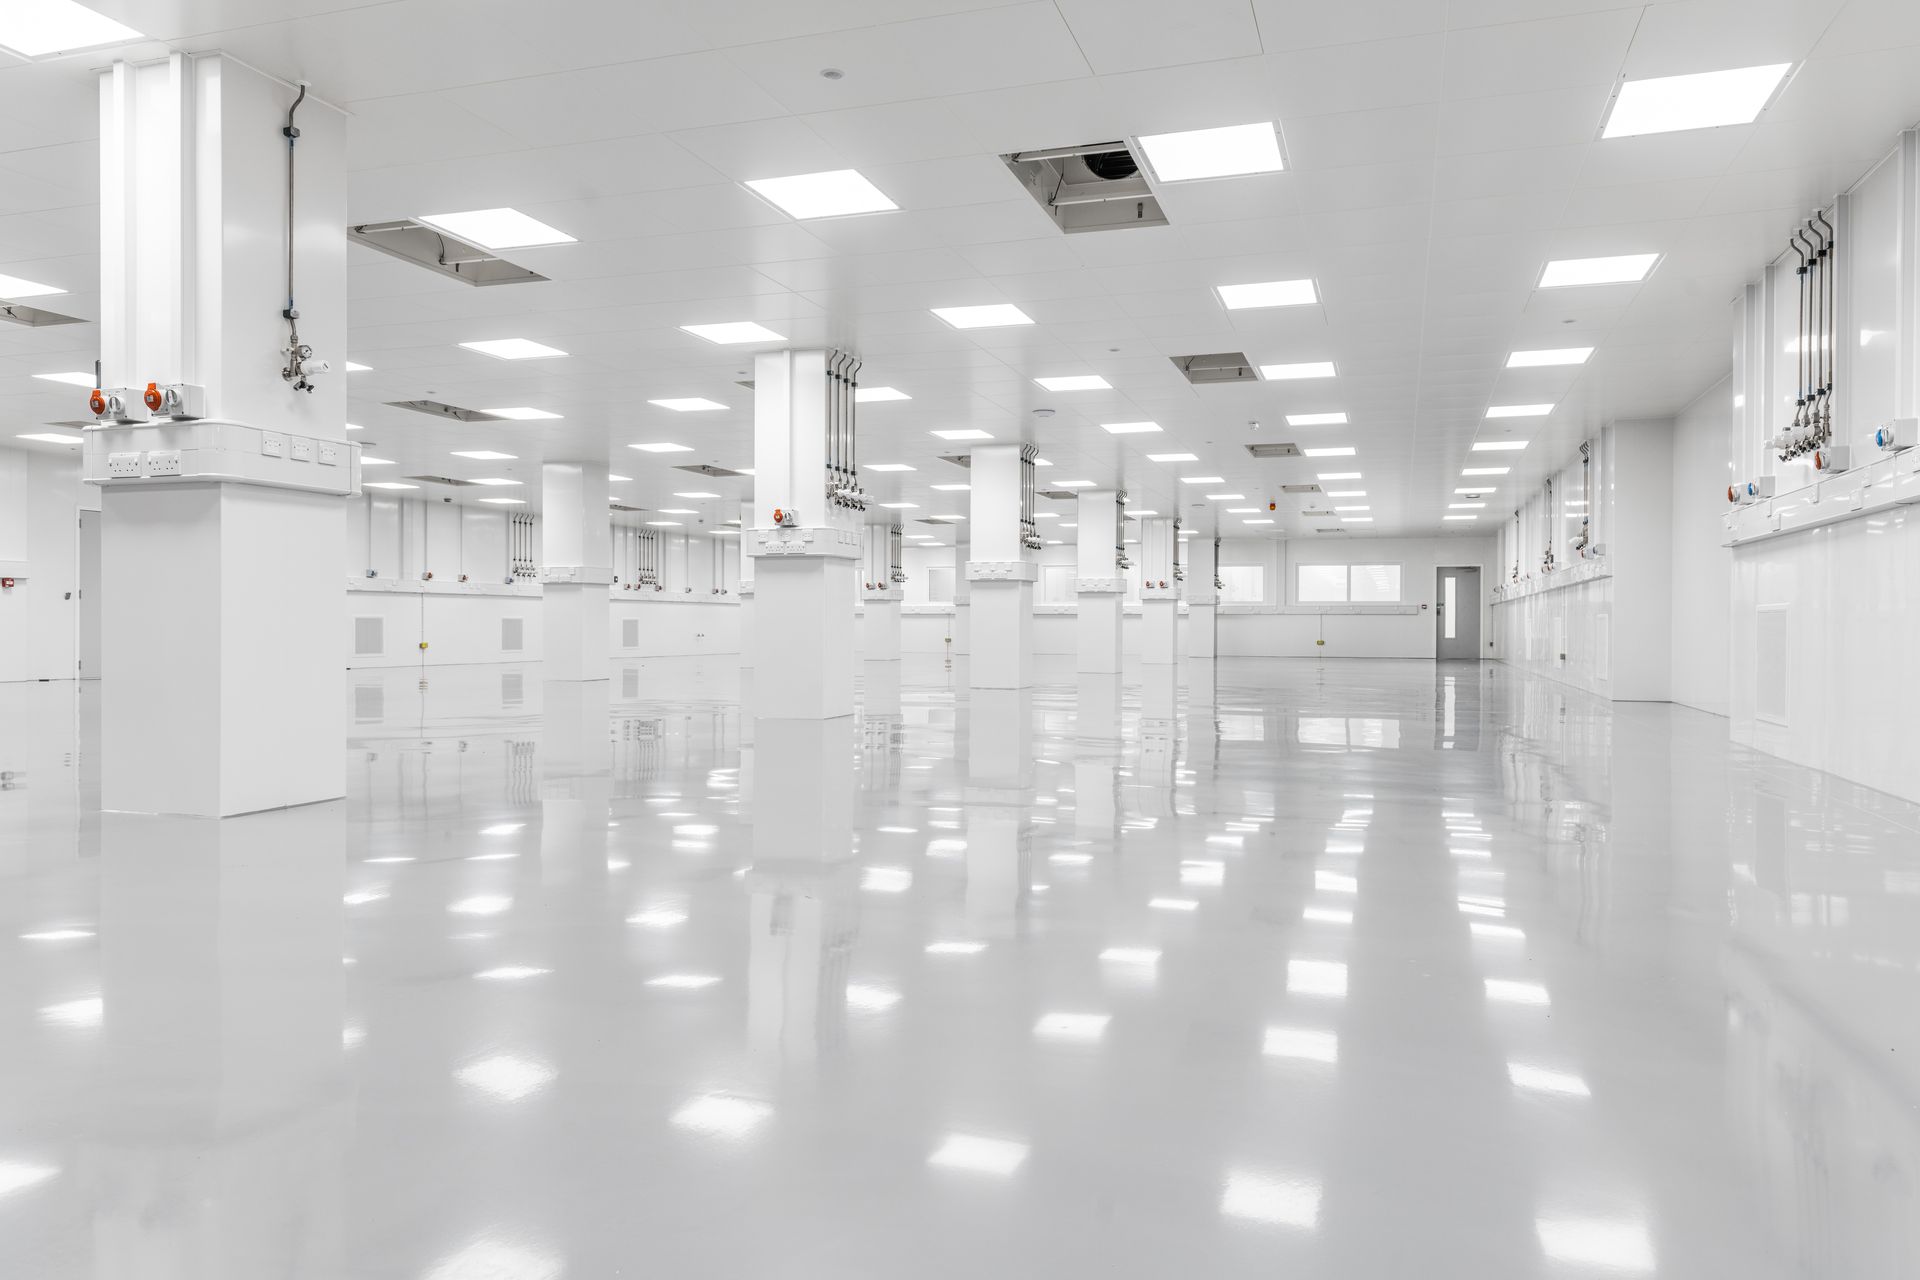 A large, bright cleanroom space with controls around the walls and on pillars.